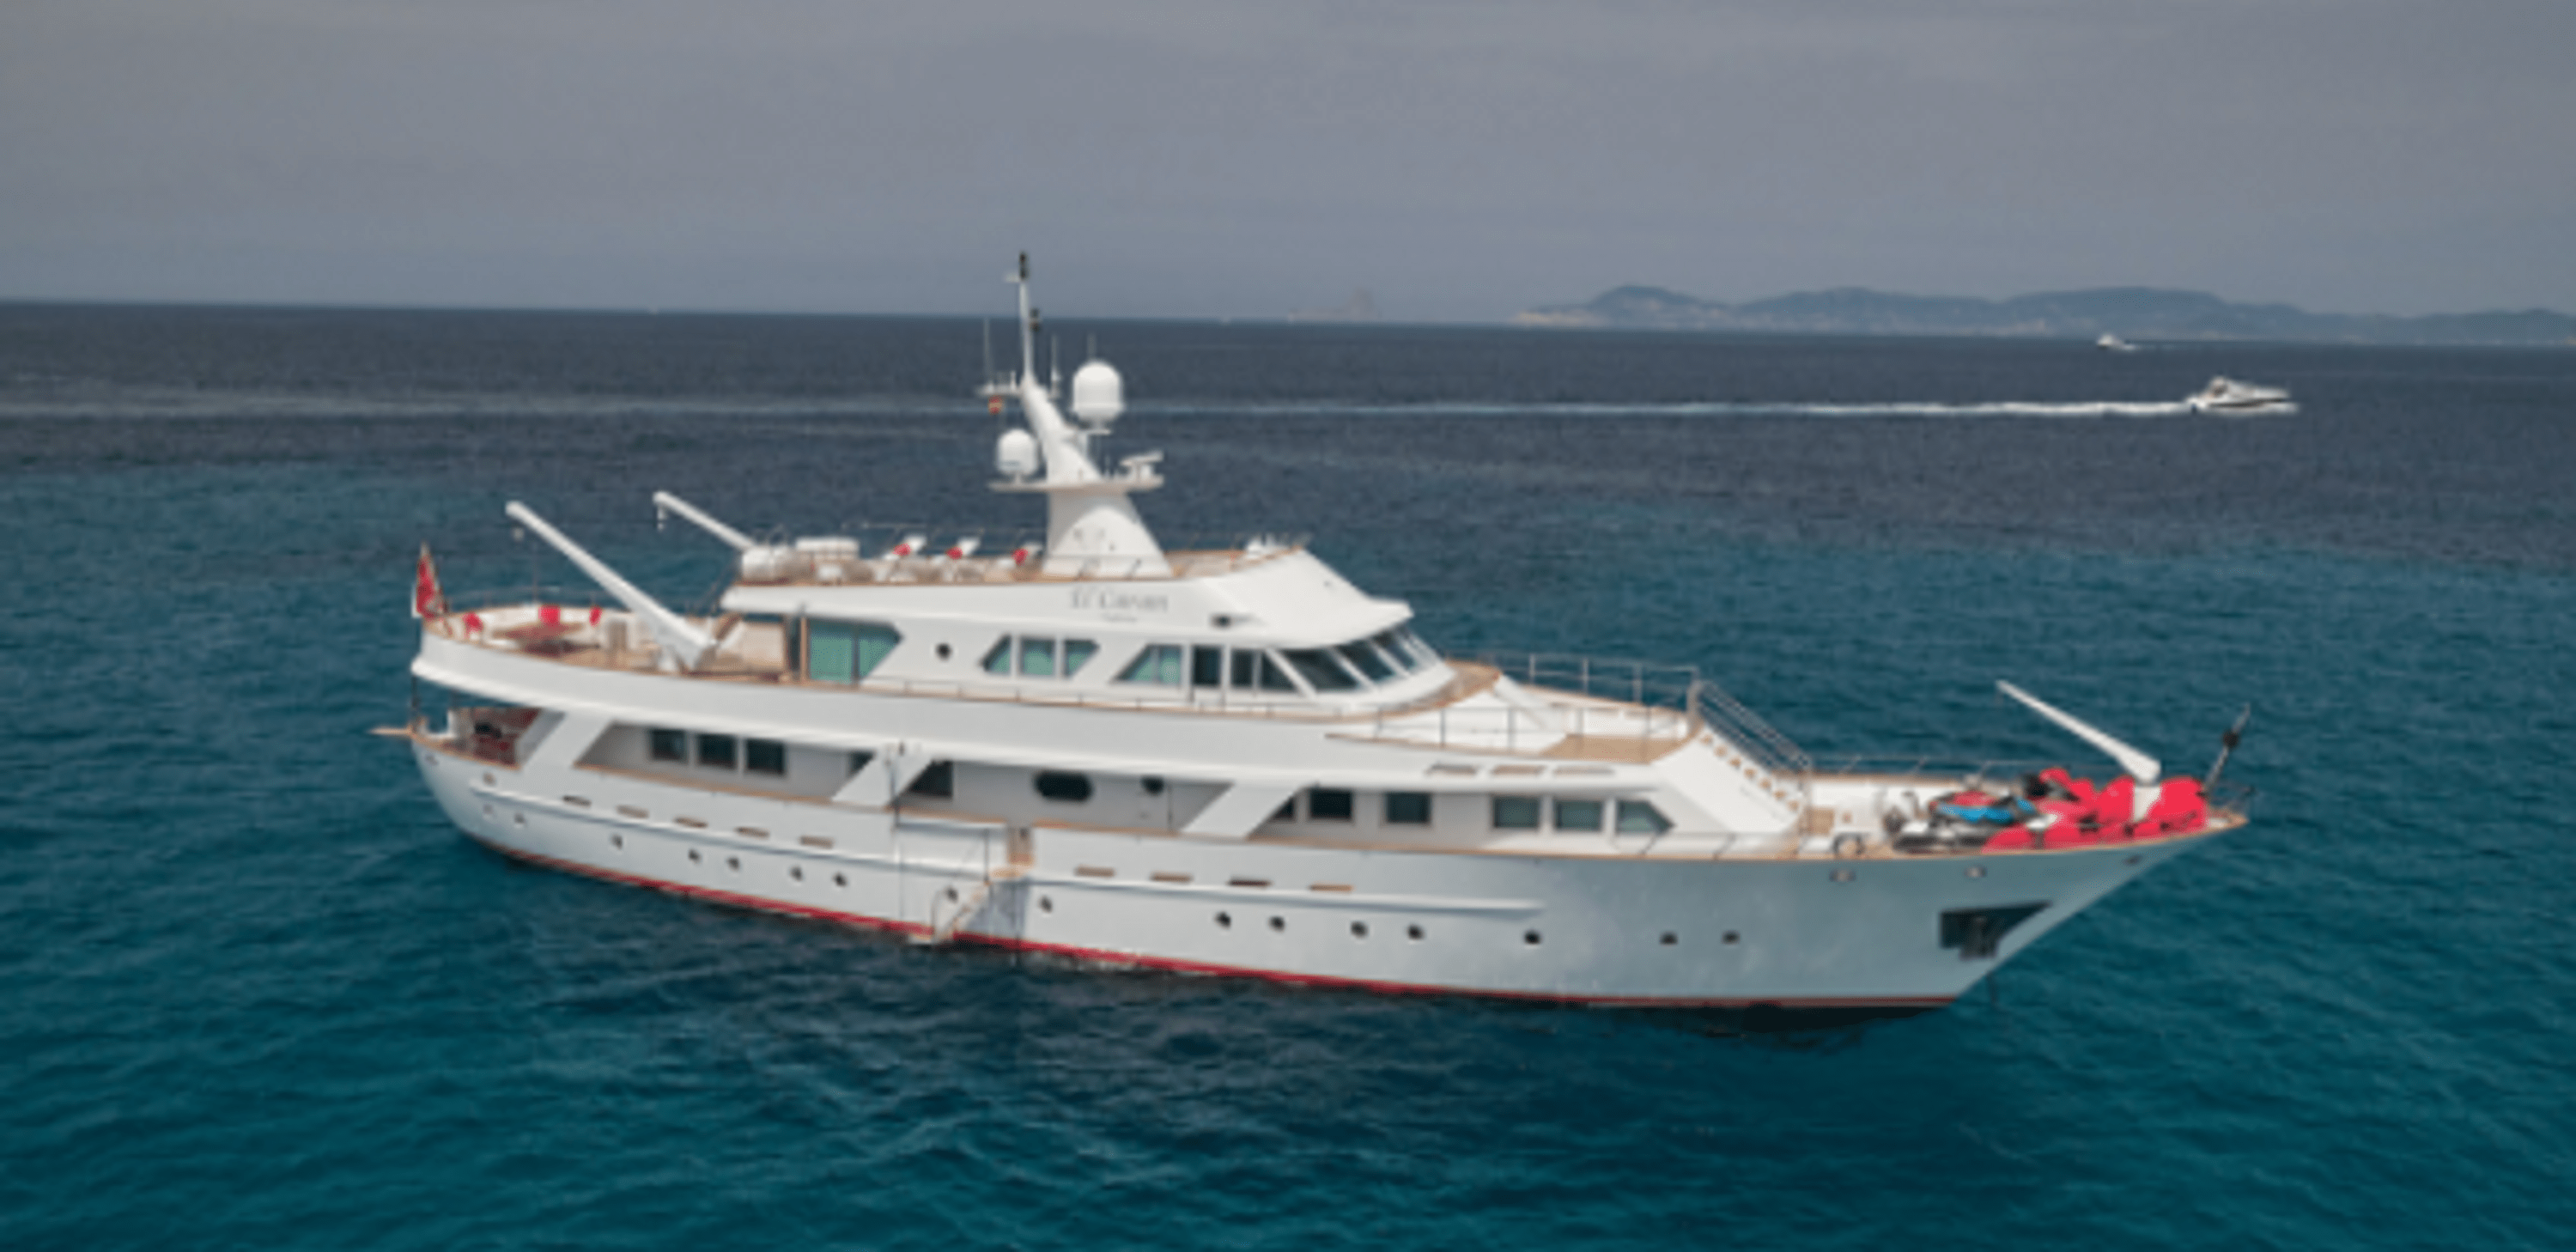 ”david-bowies-megayacht-is-on-sale-for-5-17-million”